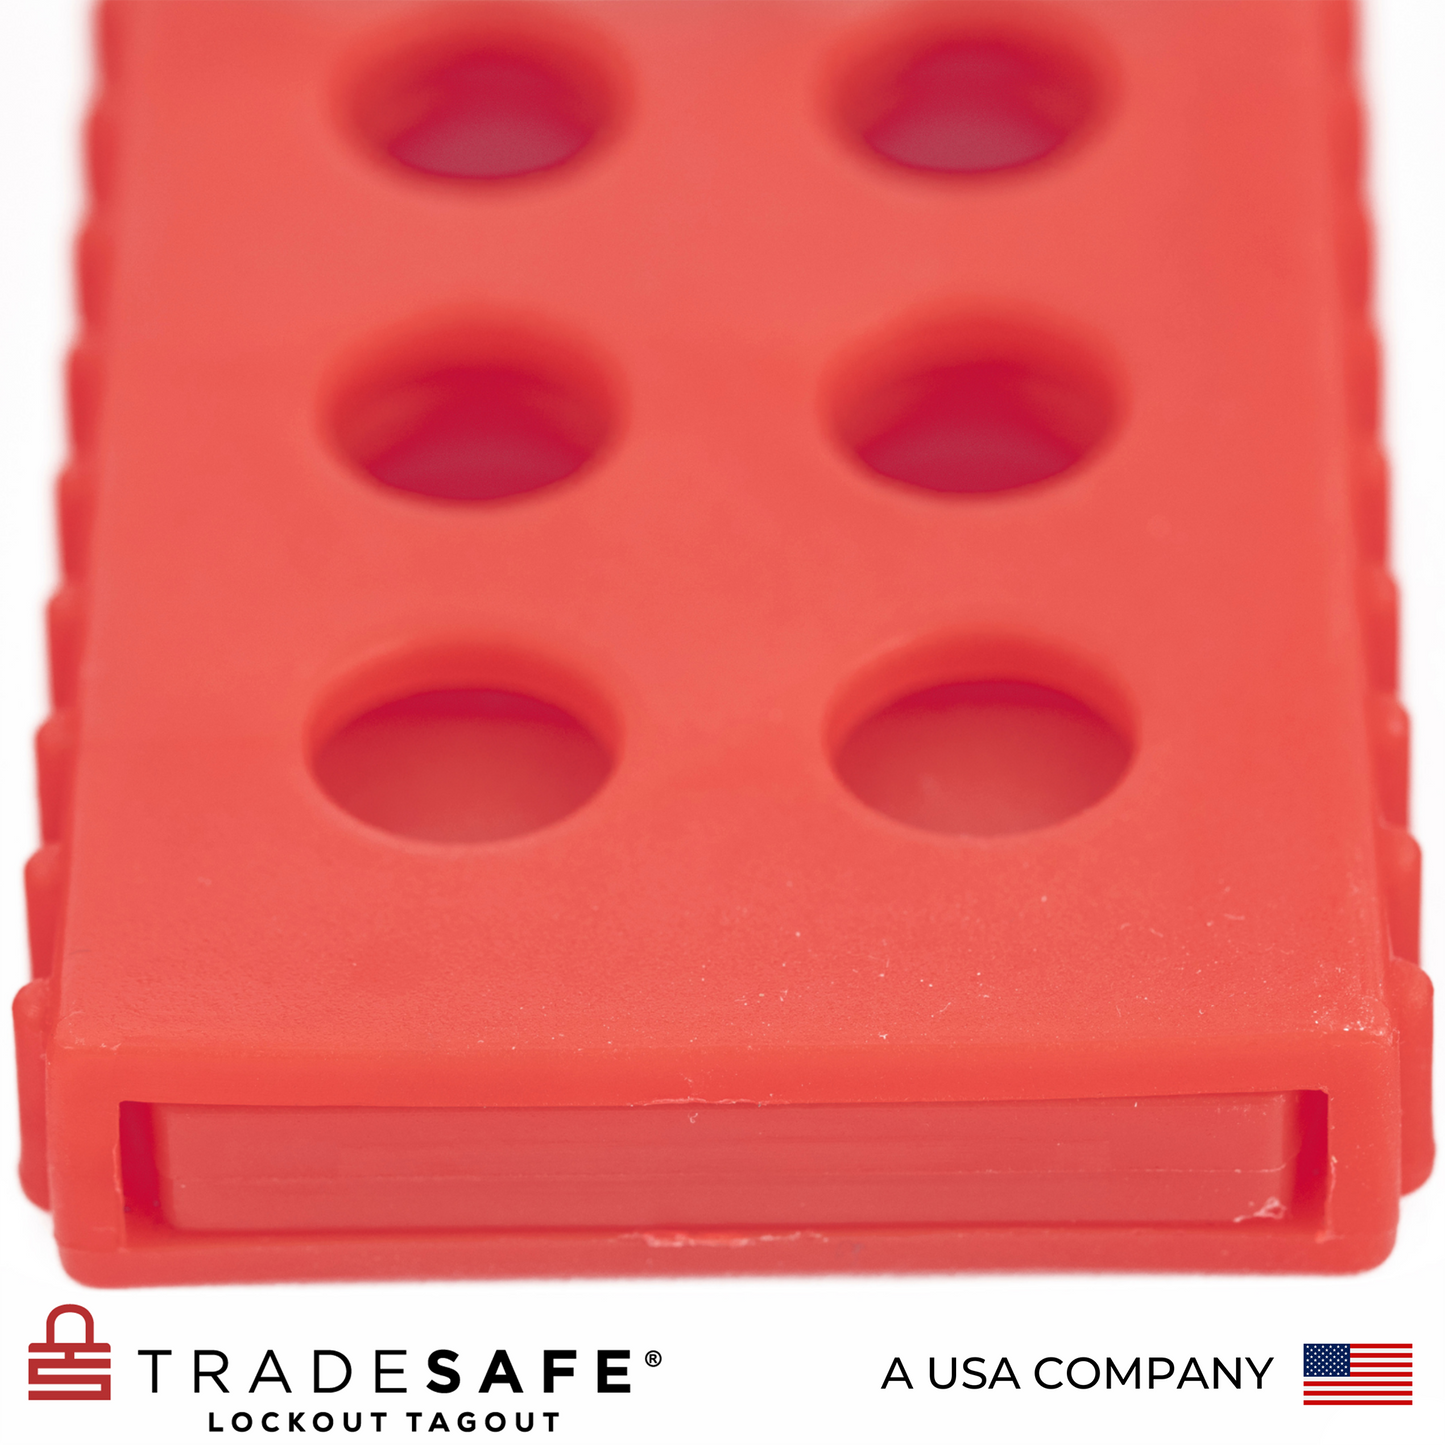 close up view of the body of the plastic red lockout tagout hasp featuring the bottom part